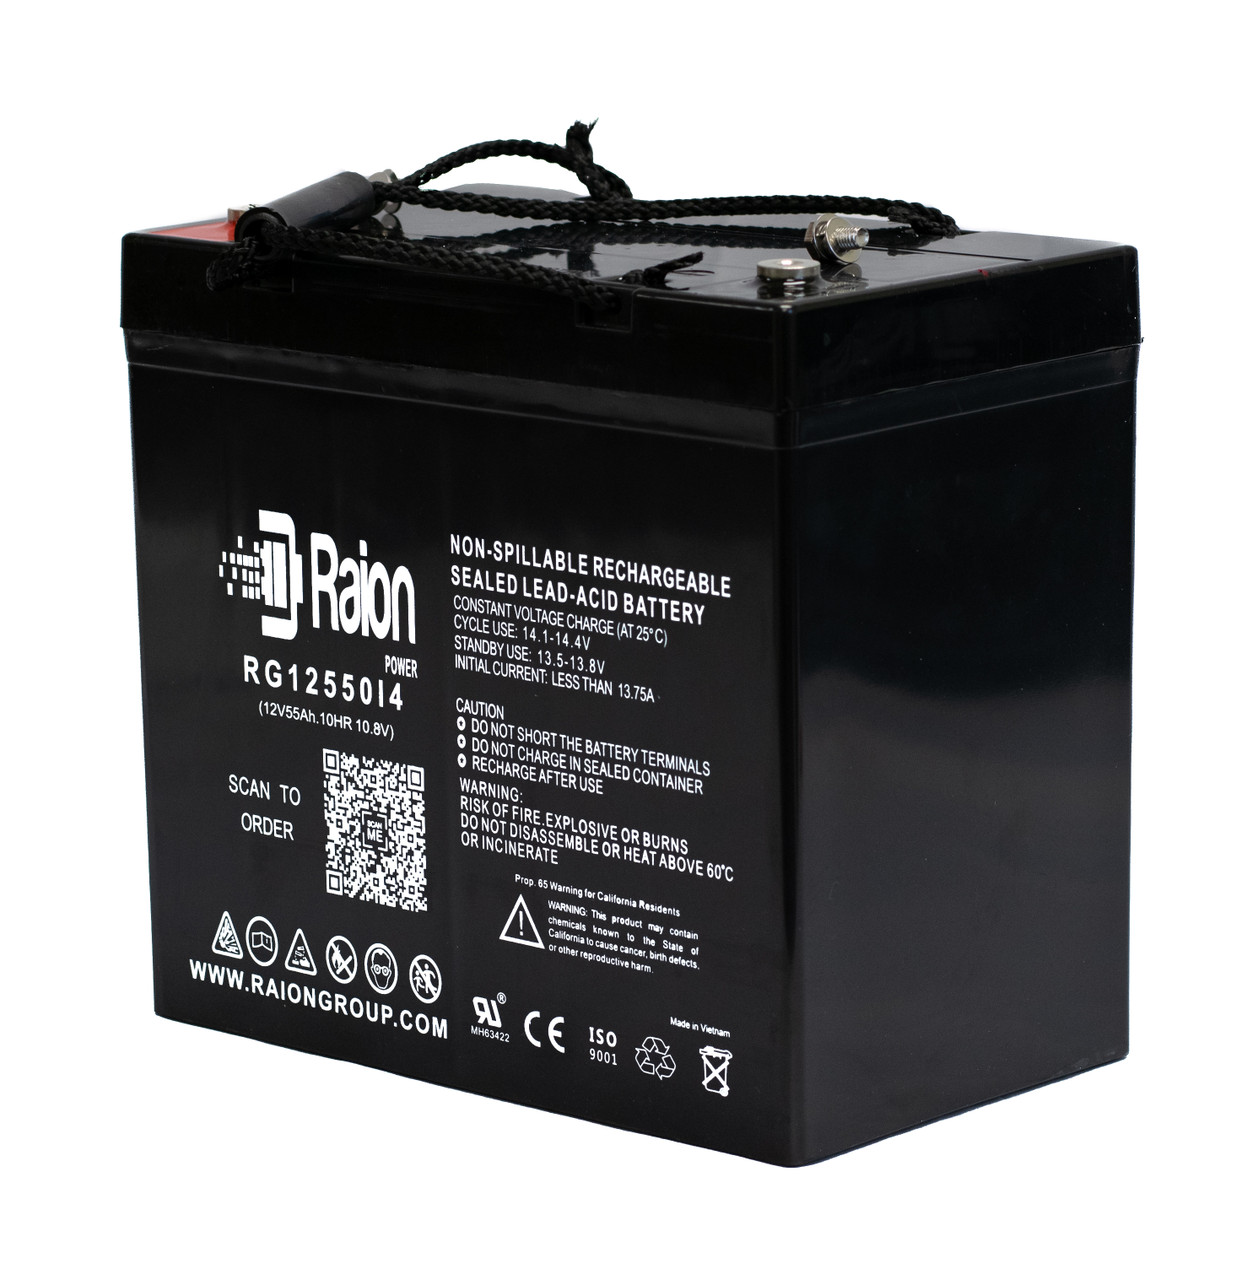 Raion Power 12V 55Ah 22NF Mobility Scooter Battery Replacement for Merits Health Products Travelease Compact Base MP3C